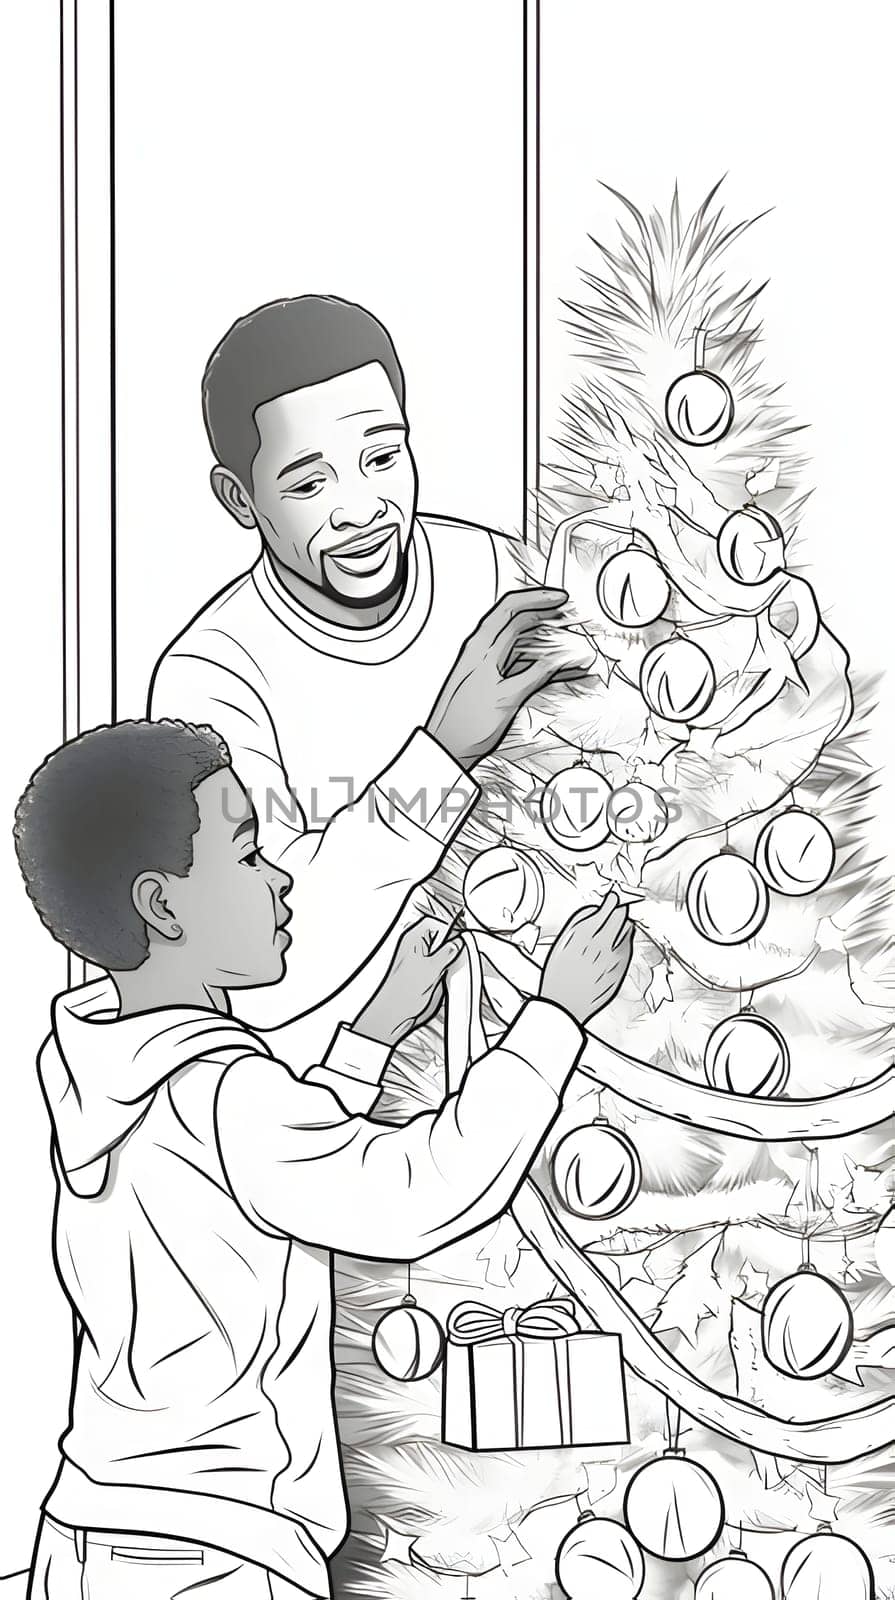 Father and son decorate Christmas tree, black and white coloring sheet. Xmas tree as a symbol of Christmas of the birth of the Savior. A time of joy and celebration.